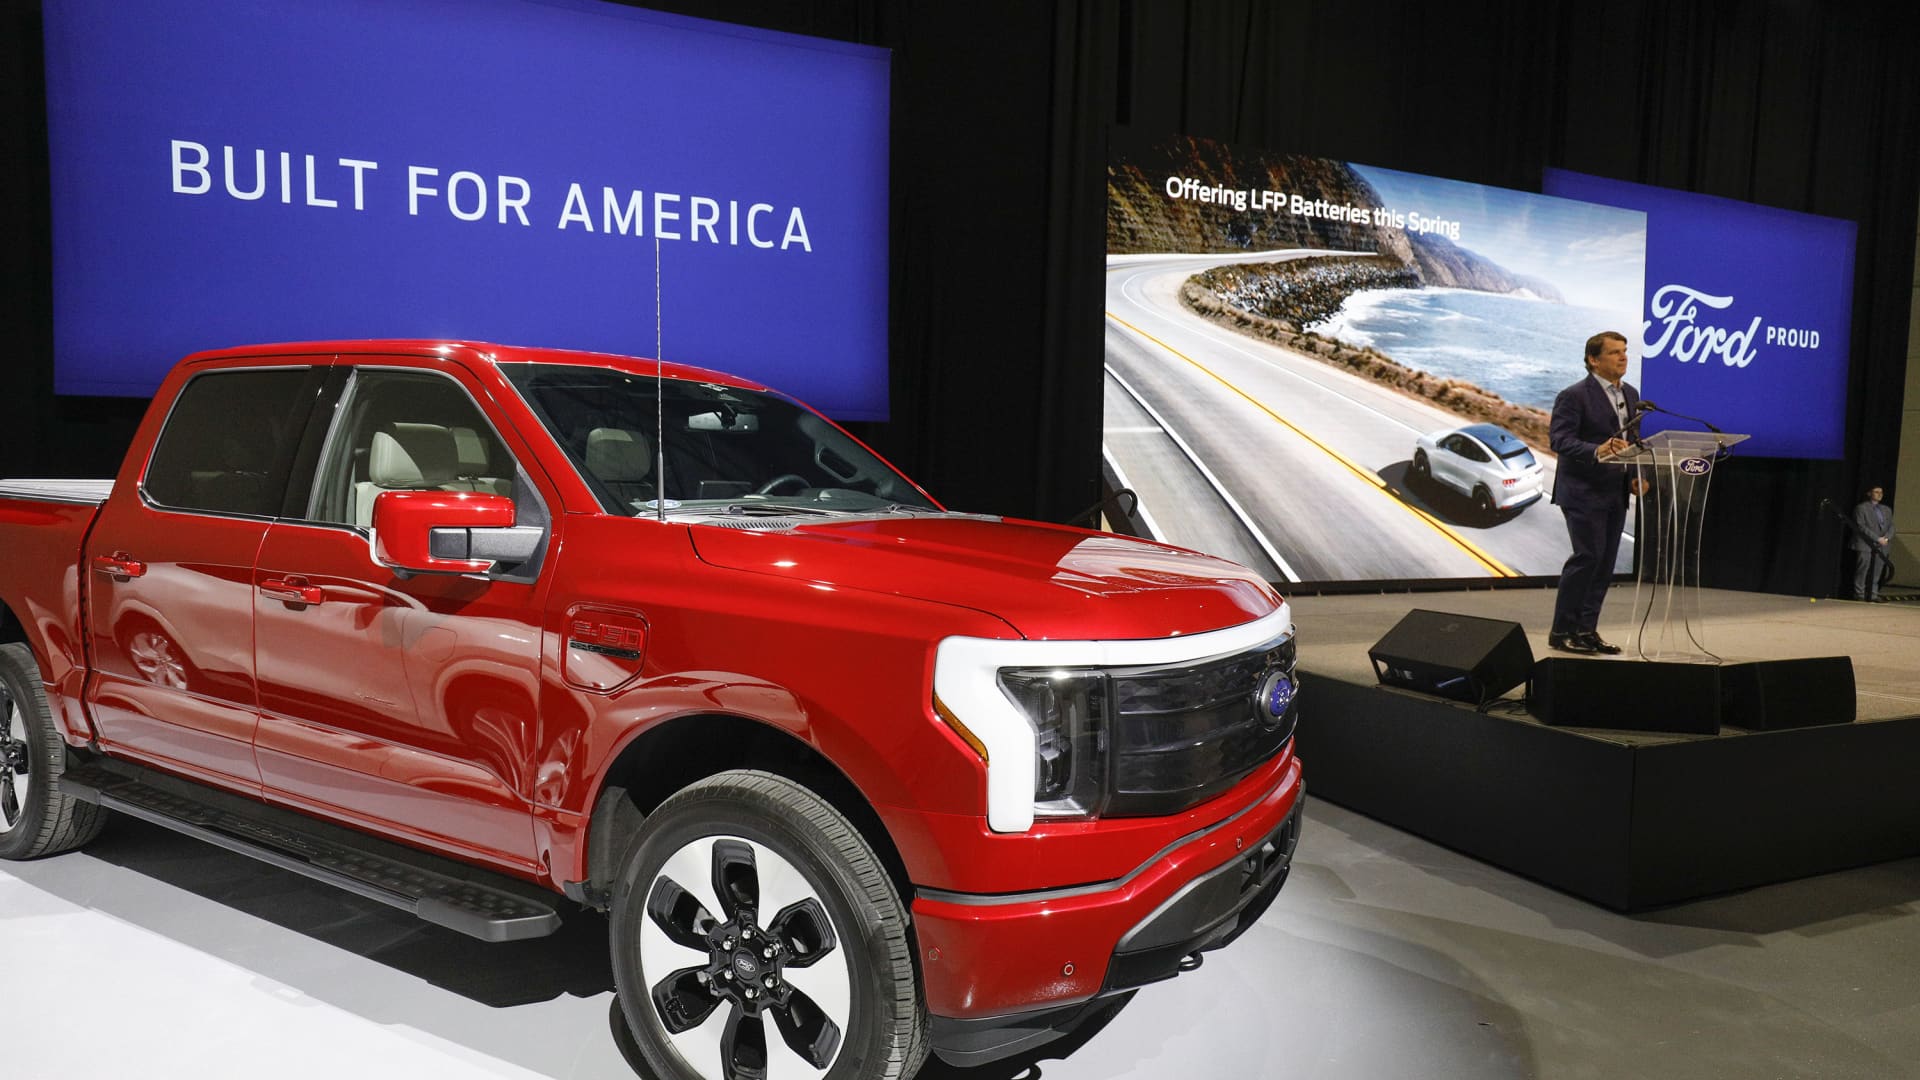 Ford delays F-150 Lightning production another week after battery fire